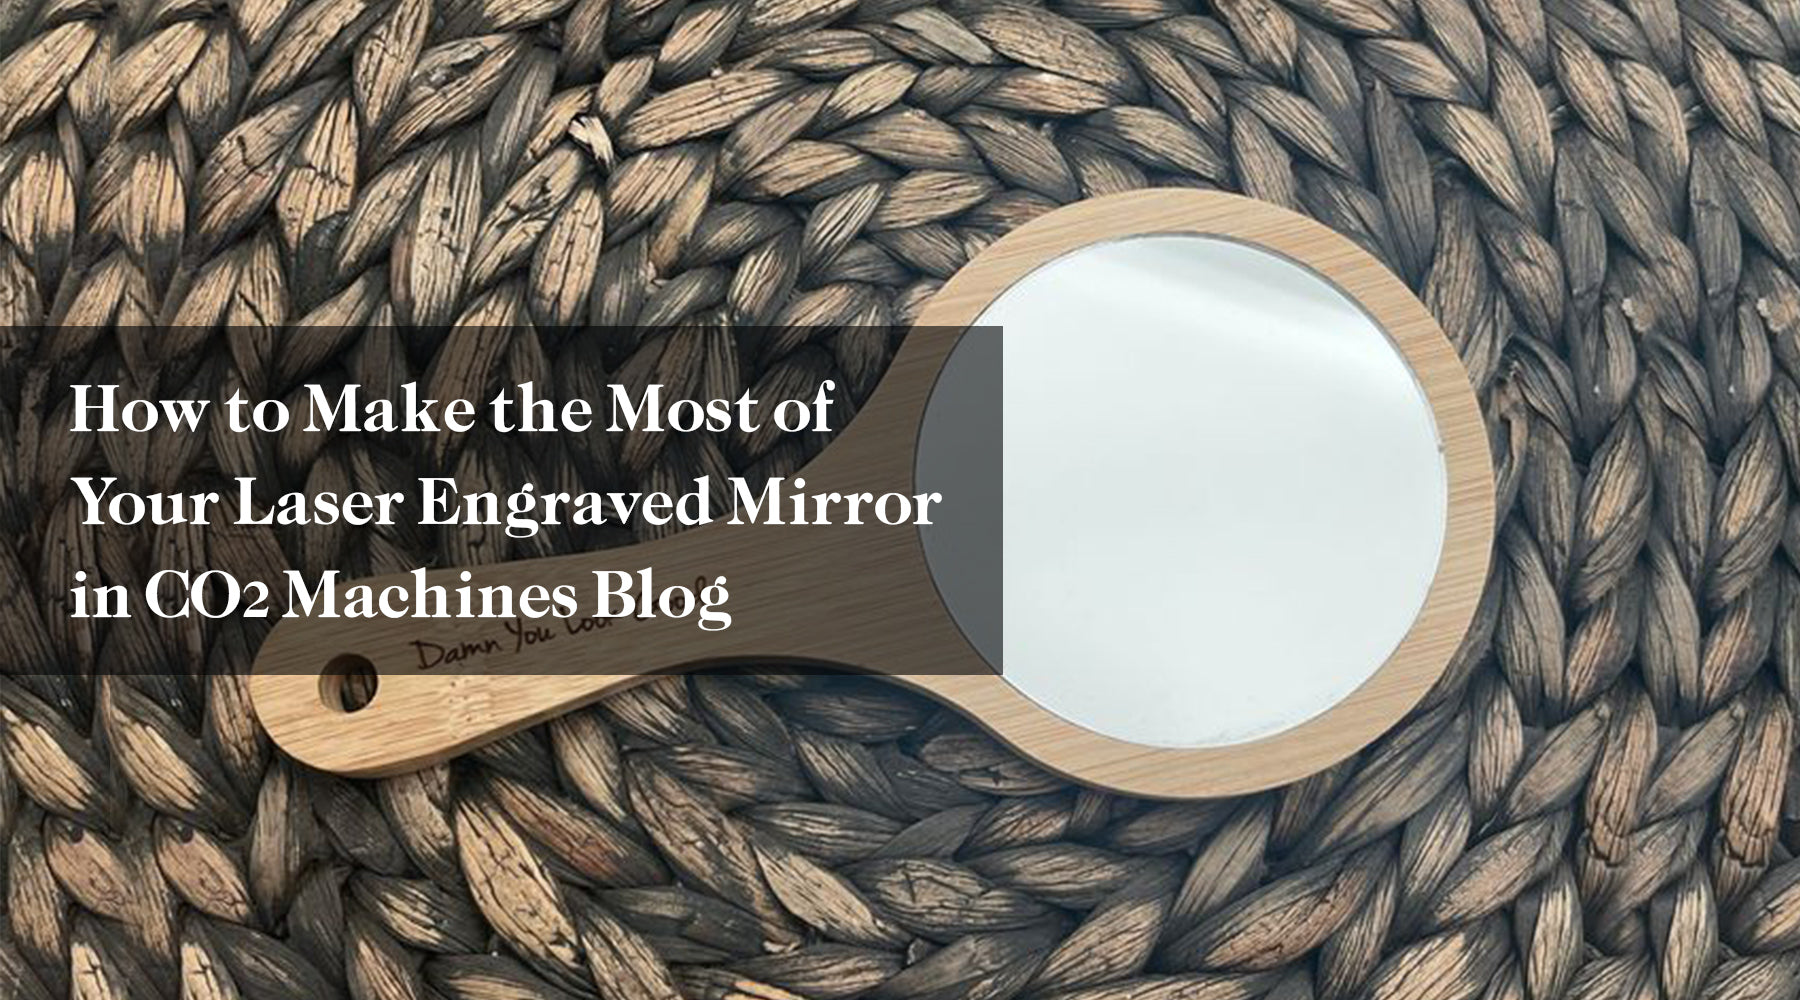 How to Make the Most of Your Laser Engraved Mirror in CO2 Machines Blog